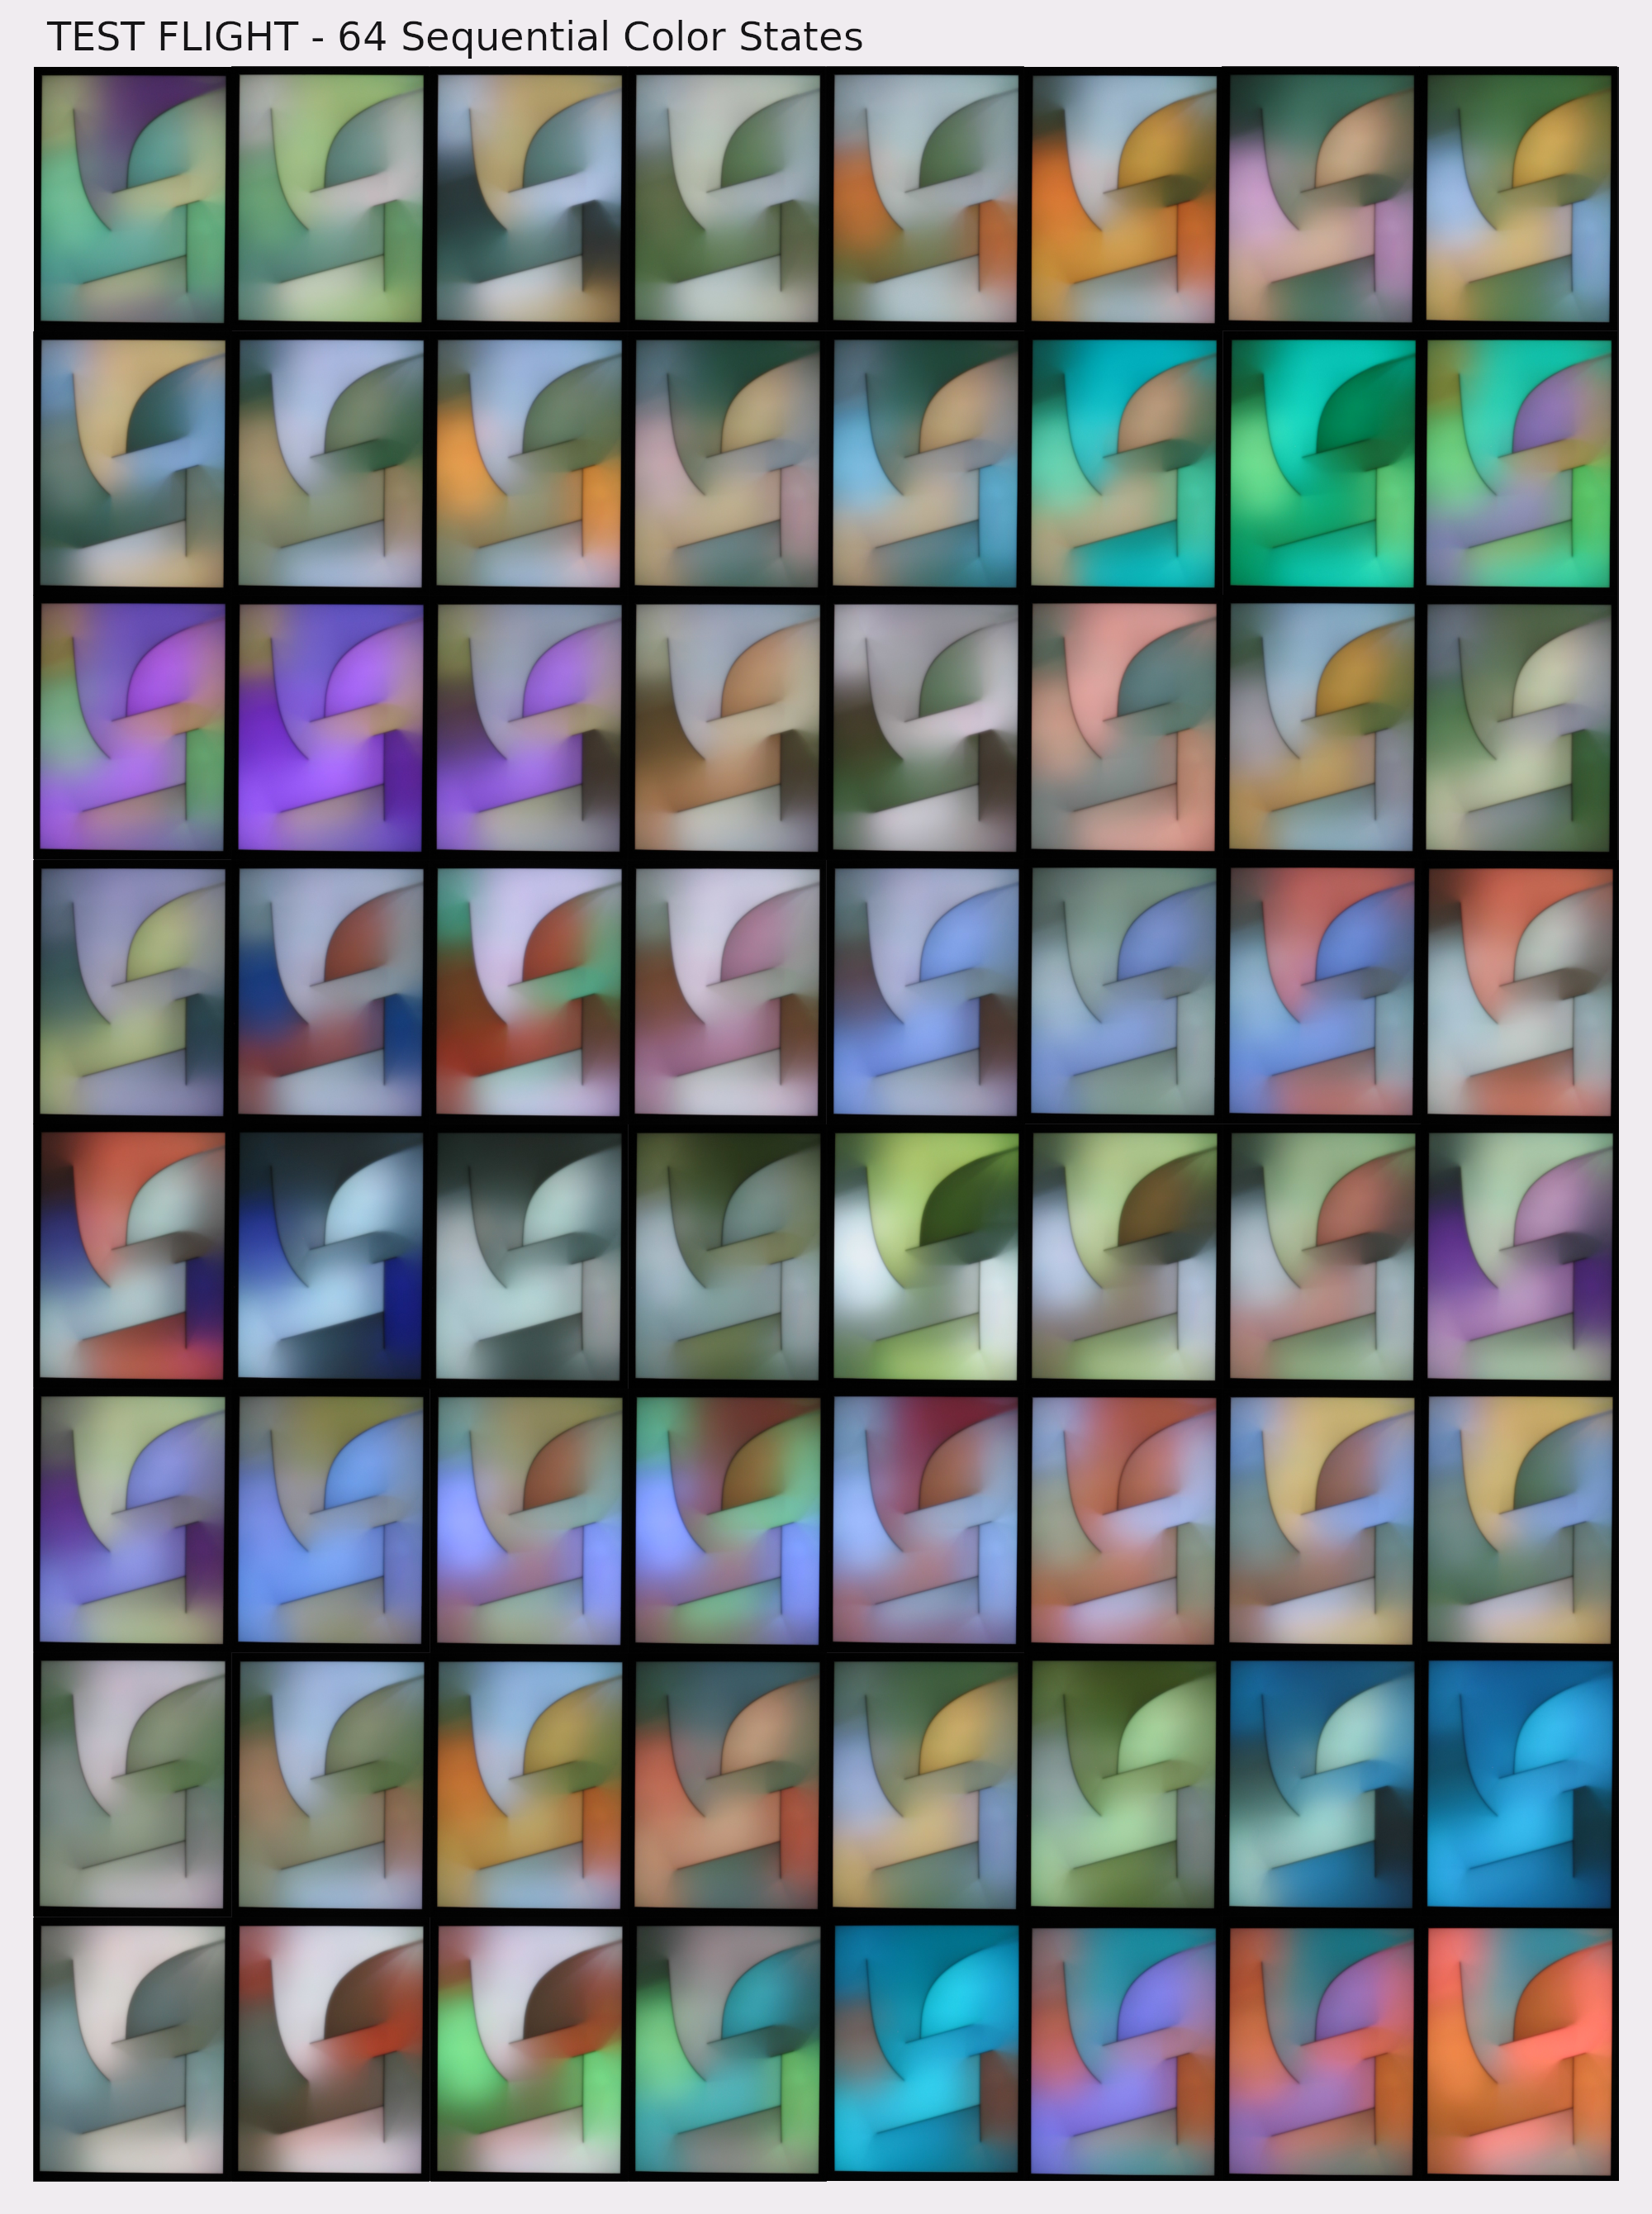 "Test Flight" in 64 consecutive color-states.